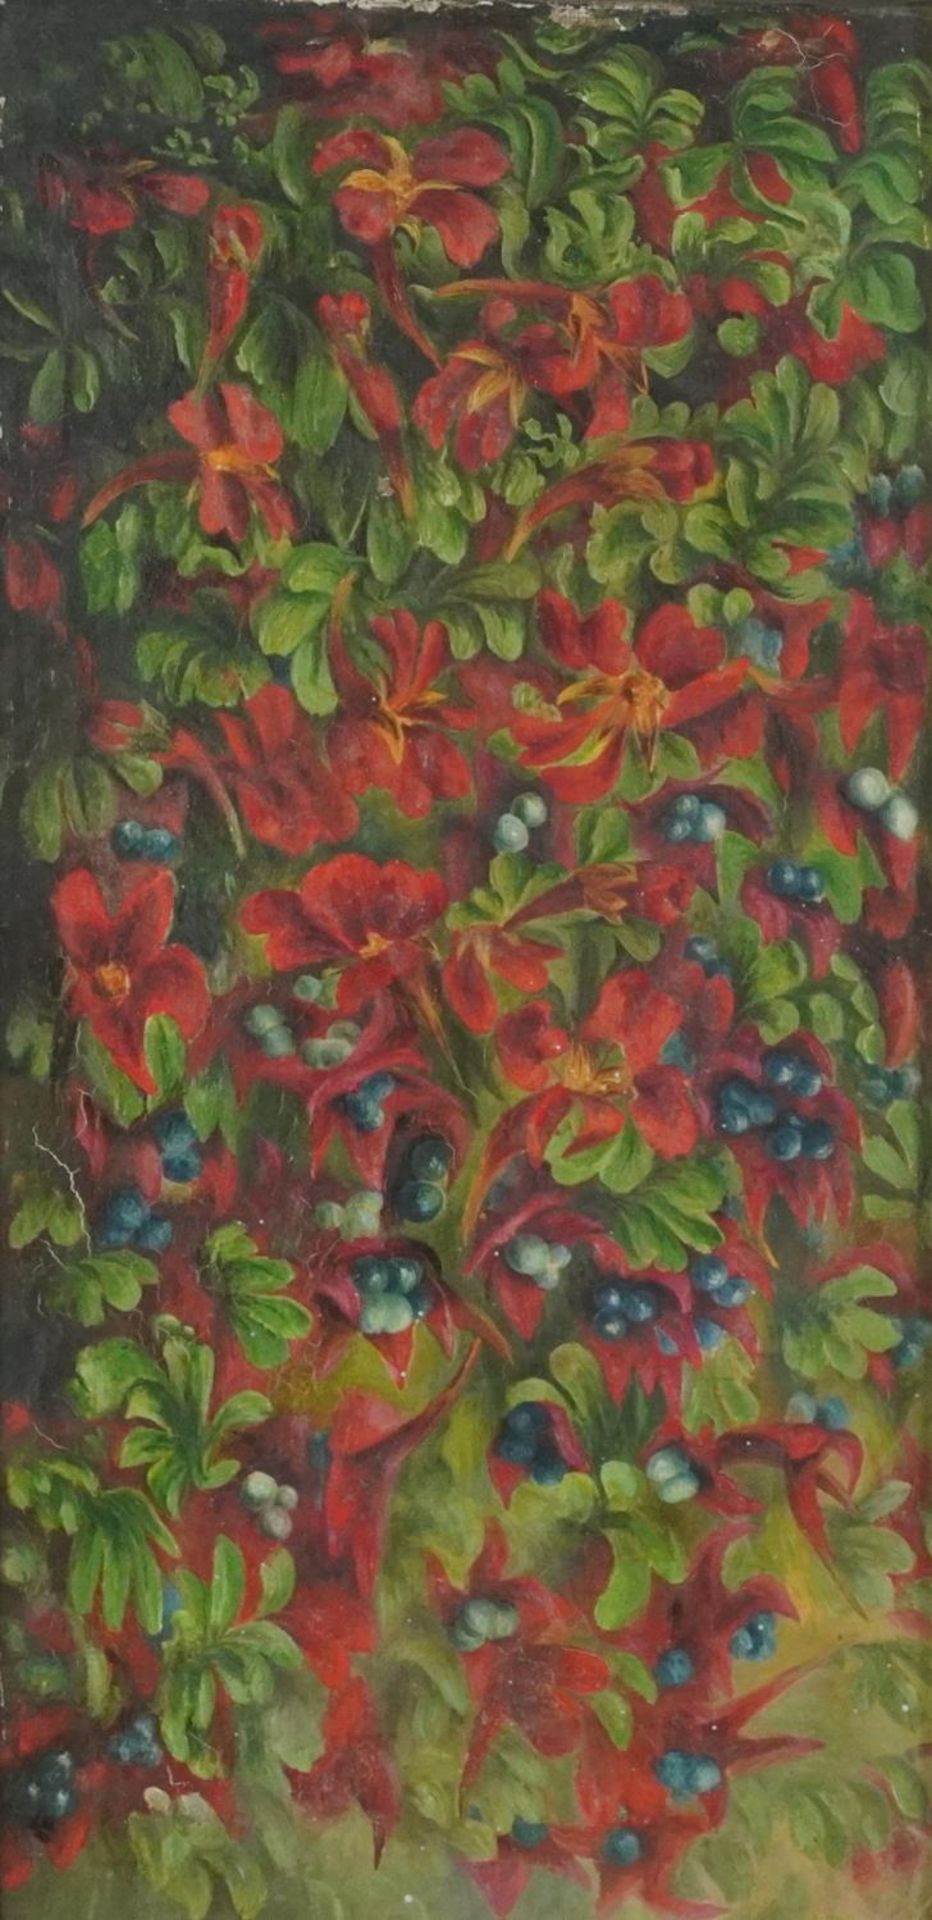 Flowers and berries, 20th century oil on canvas, Winsor & Newton stamp verso, mounted, framed and